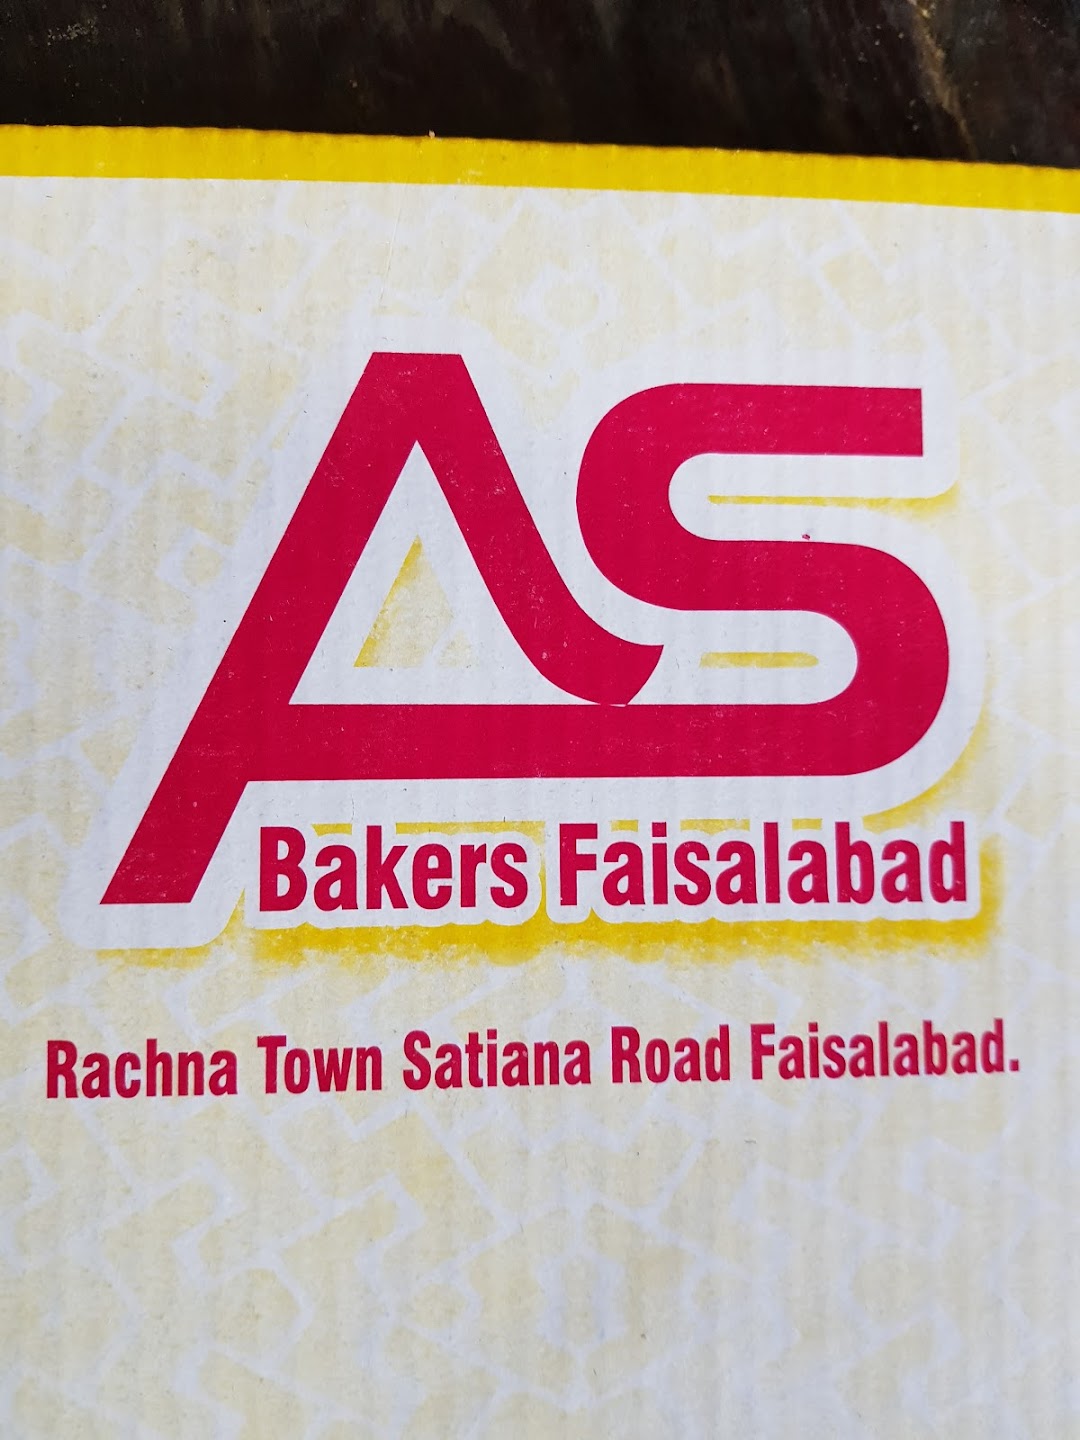 A.s bakers